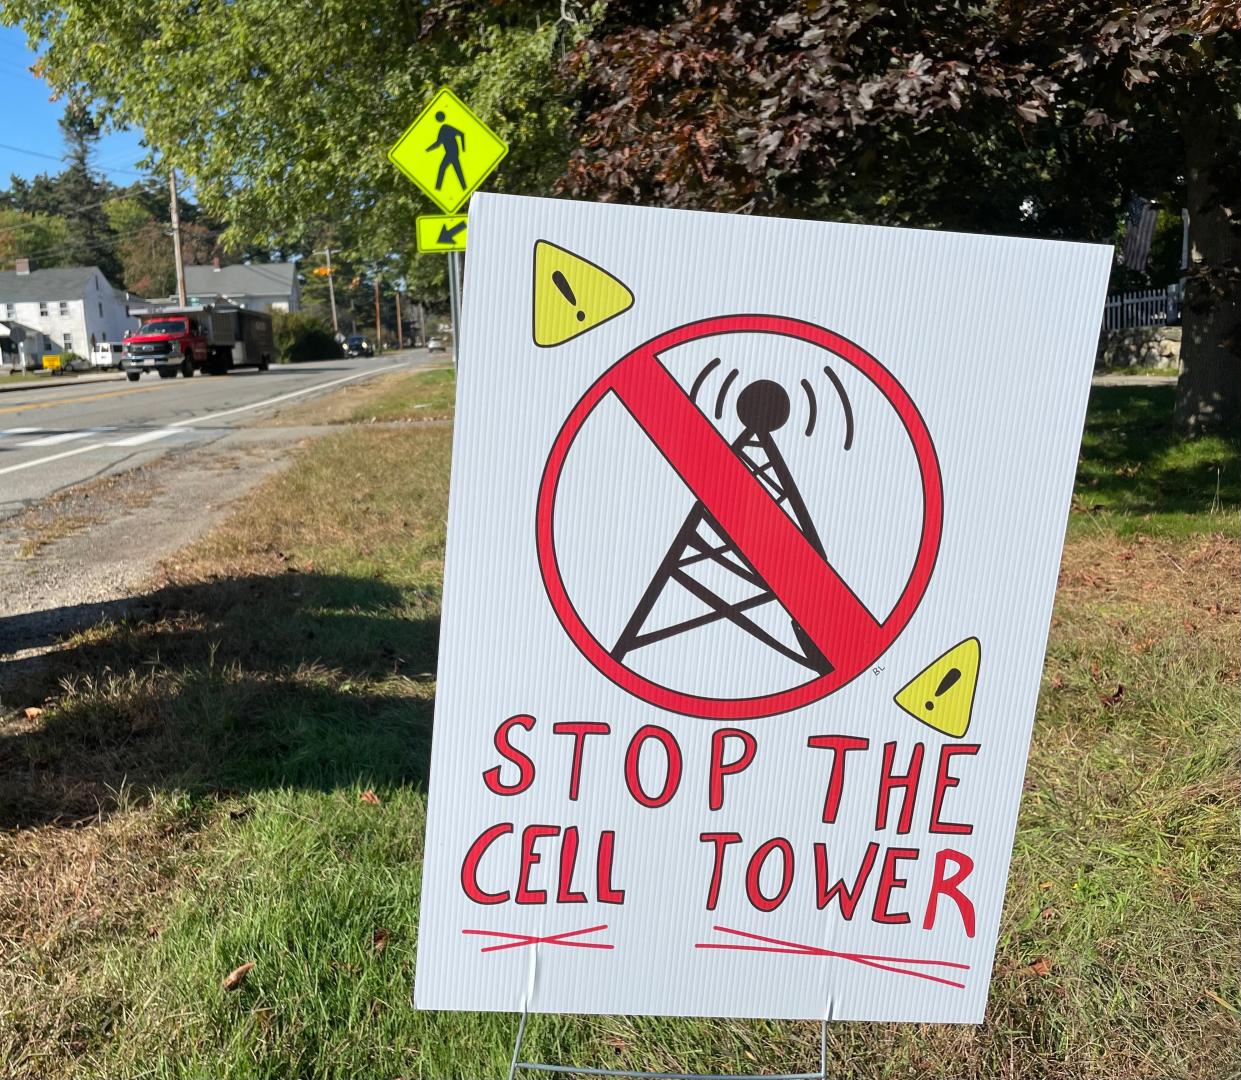 Residents in Hampton, New Hampshire, installed signs to oppose new cell towers, the installation of which has drawn pushback in communities from Los Angeles County to Tucson to Delaware. But local governments have no power to stop companies like Verizon from erecting the internet facilities.